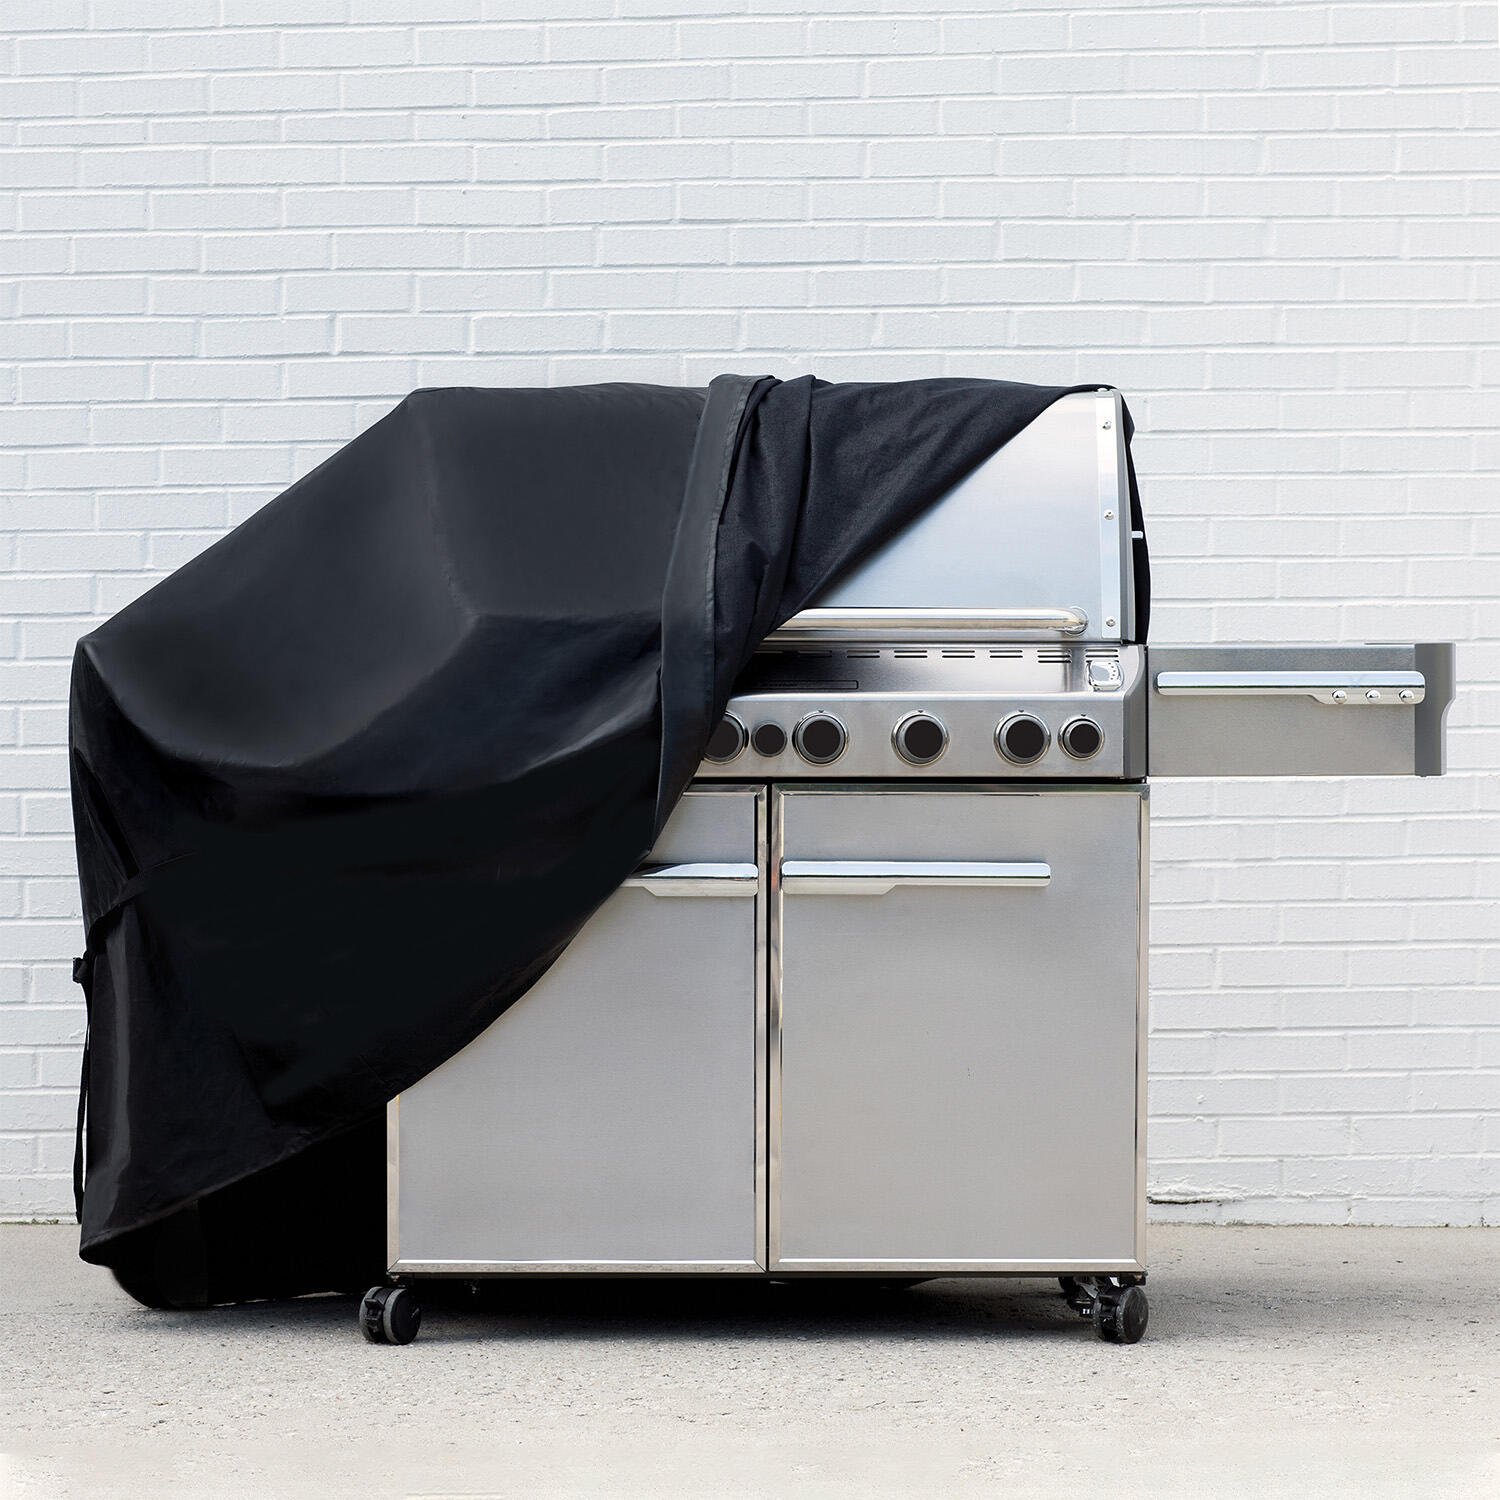 SHOP GRILL & HEATER COVERS